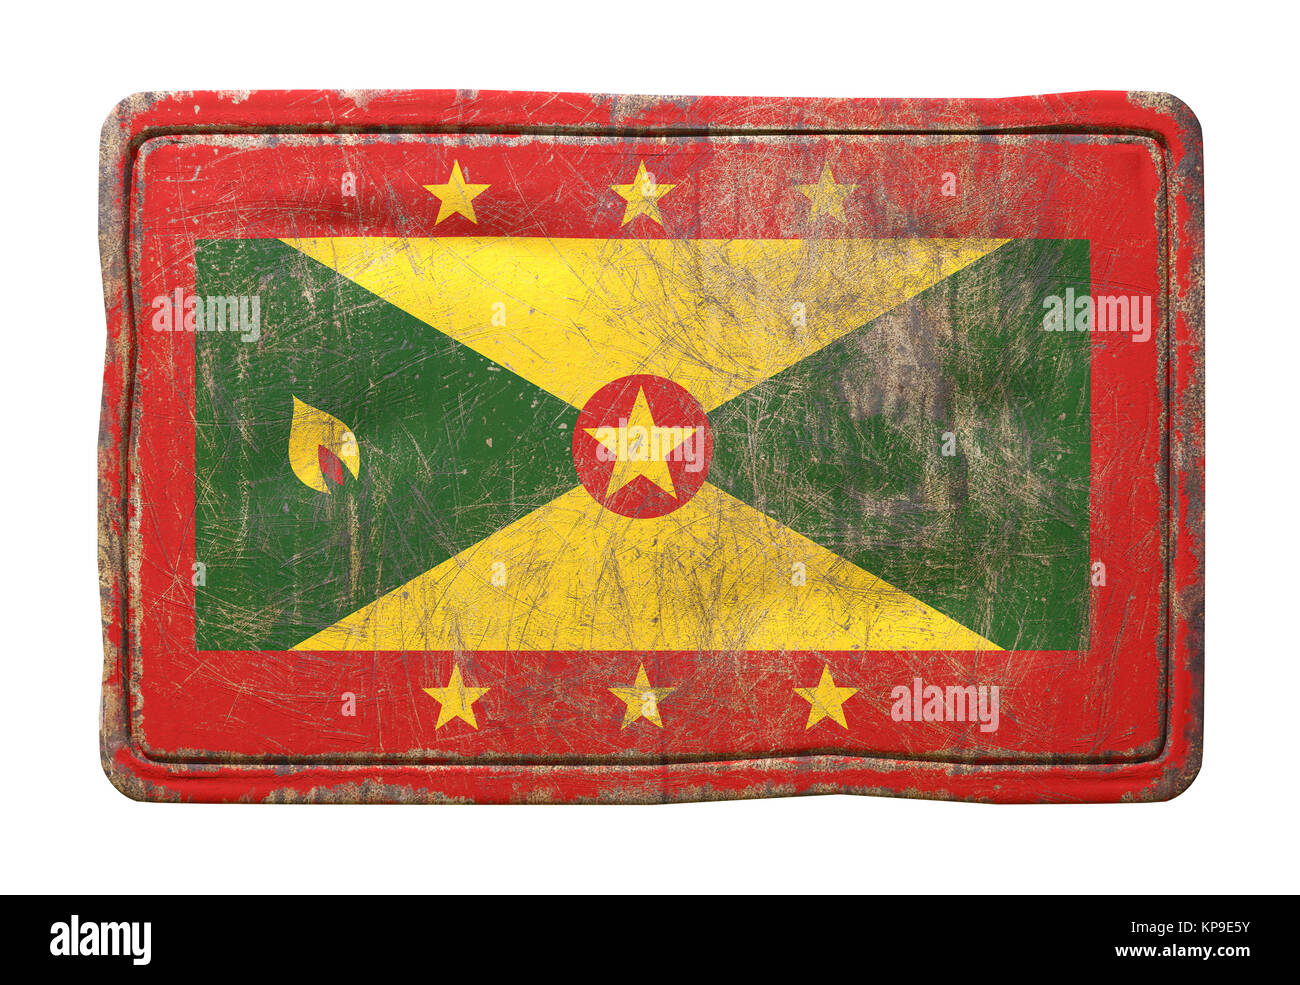 3d rendering of a Grenada flag over a rusty metallic plate. Isolated on white background. Stock Photo